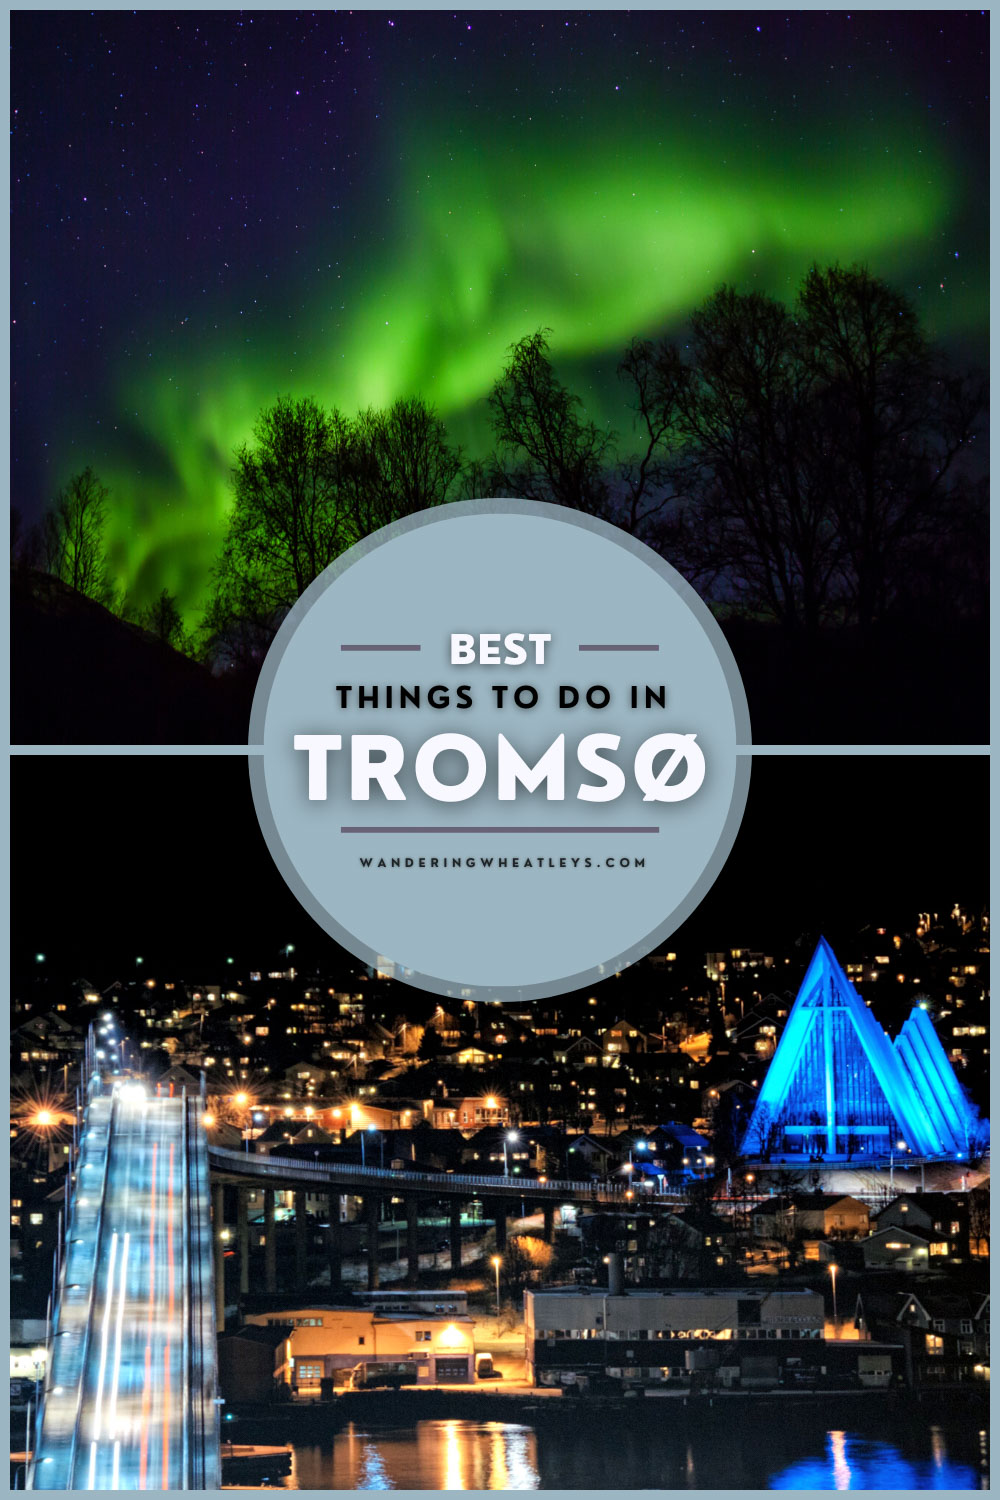 The Best Things to do in Tromso, Norway.